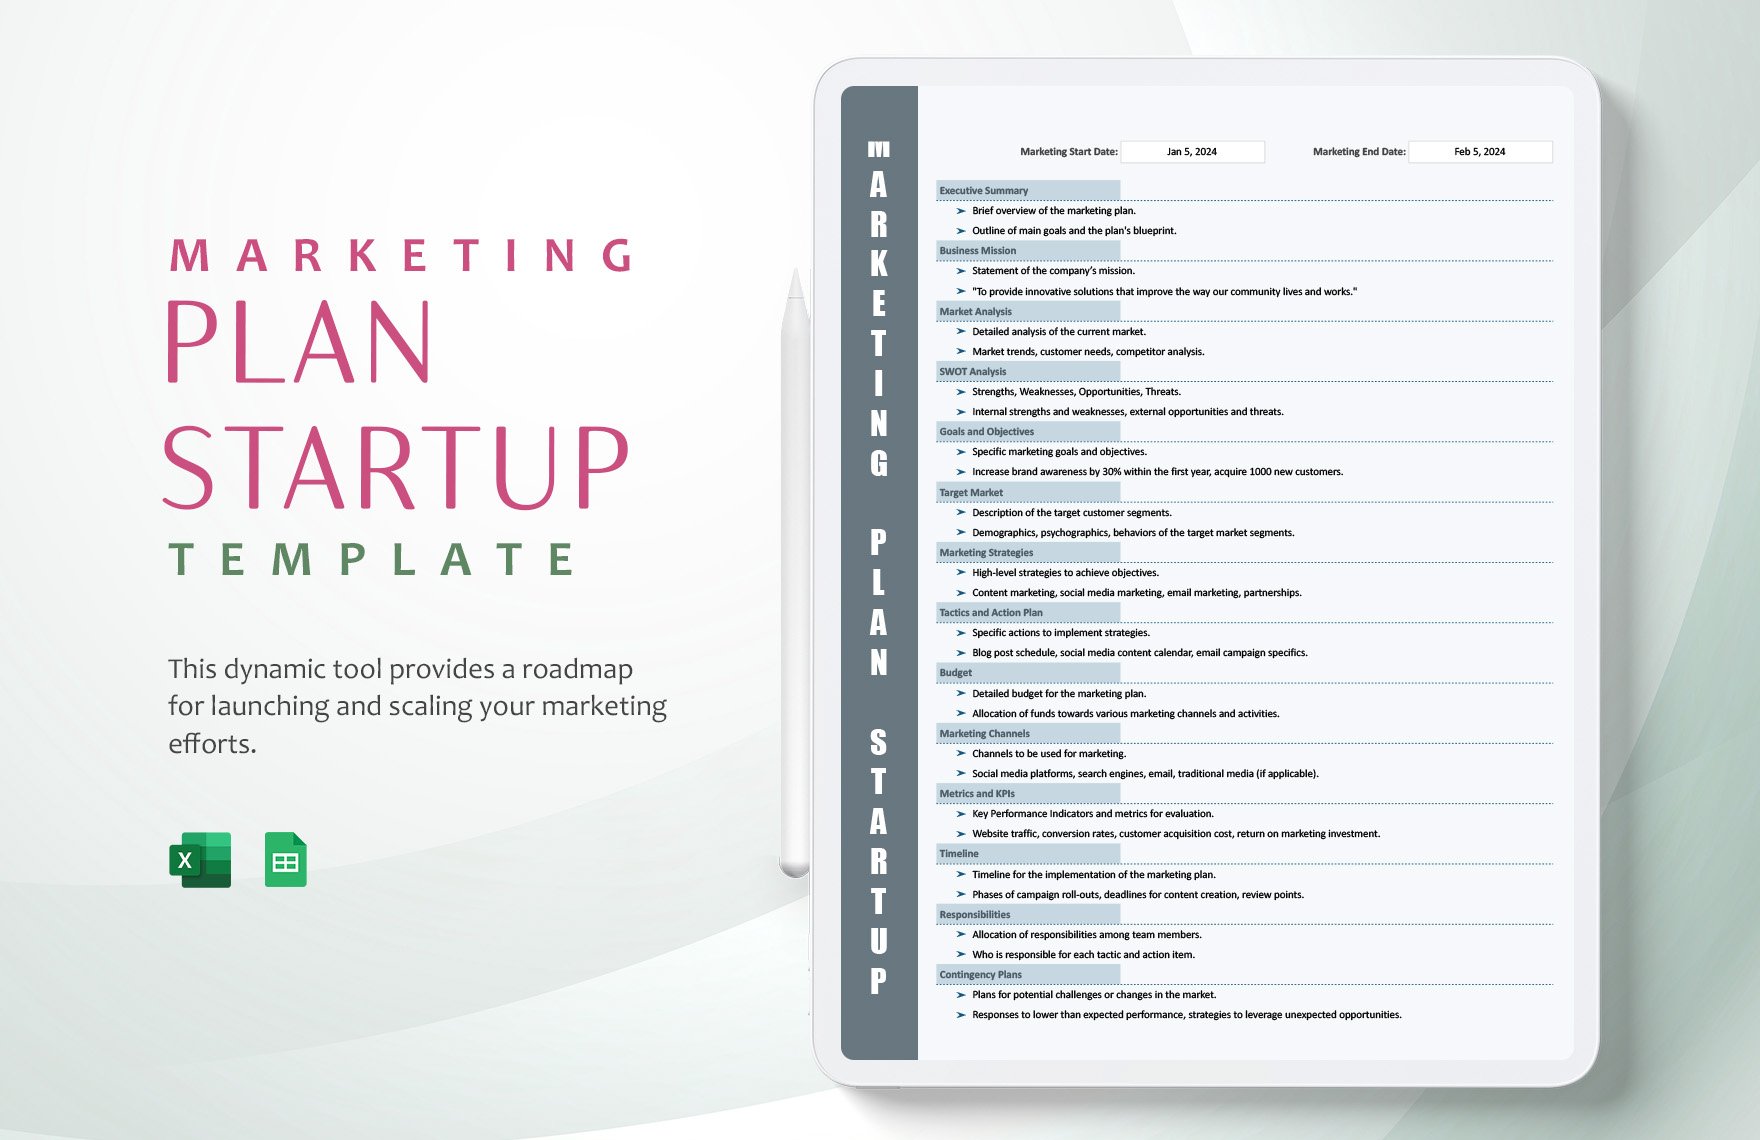 Marketing Plan Startup Template in Excel, Google Sheets